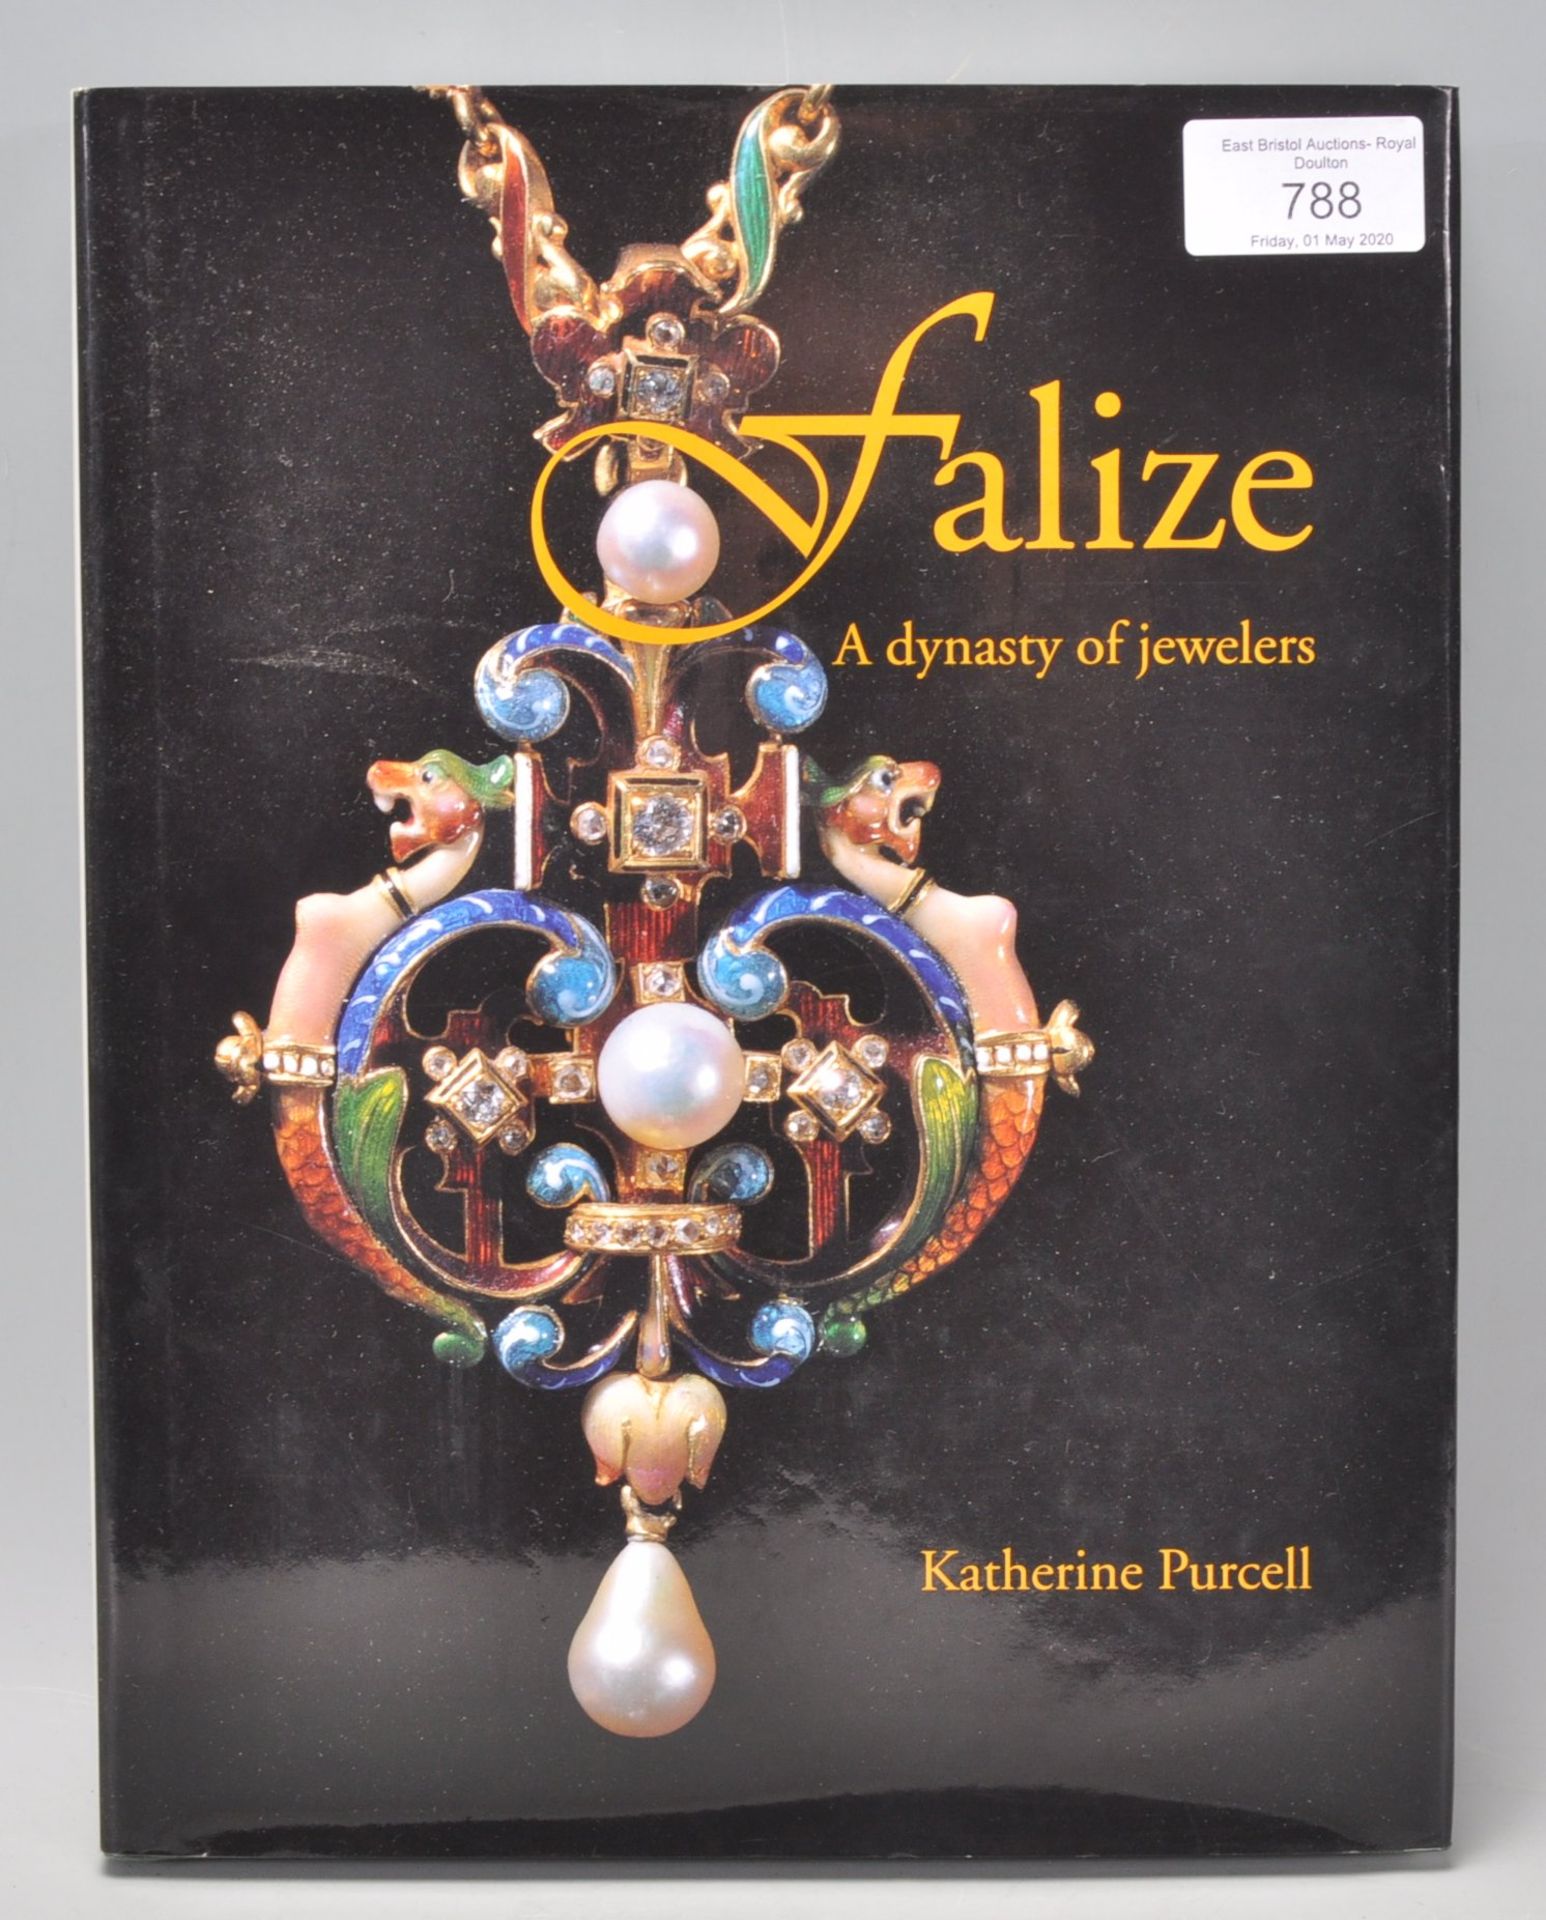 Jewellery reference books; Falize: A Dynasty of Jewelers by Katherine Purcell, hardcover with dust